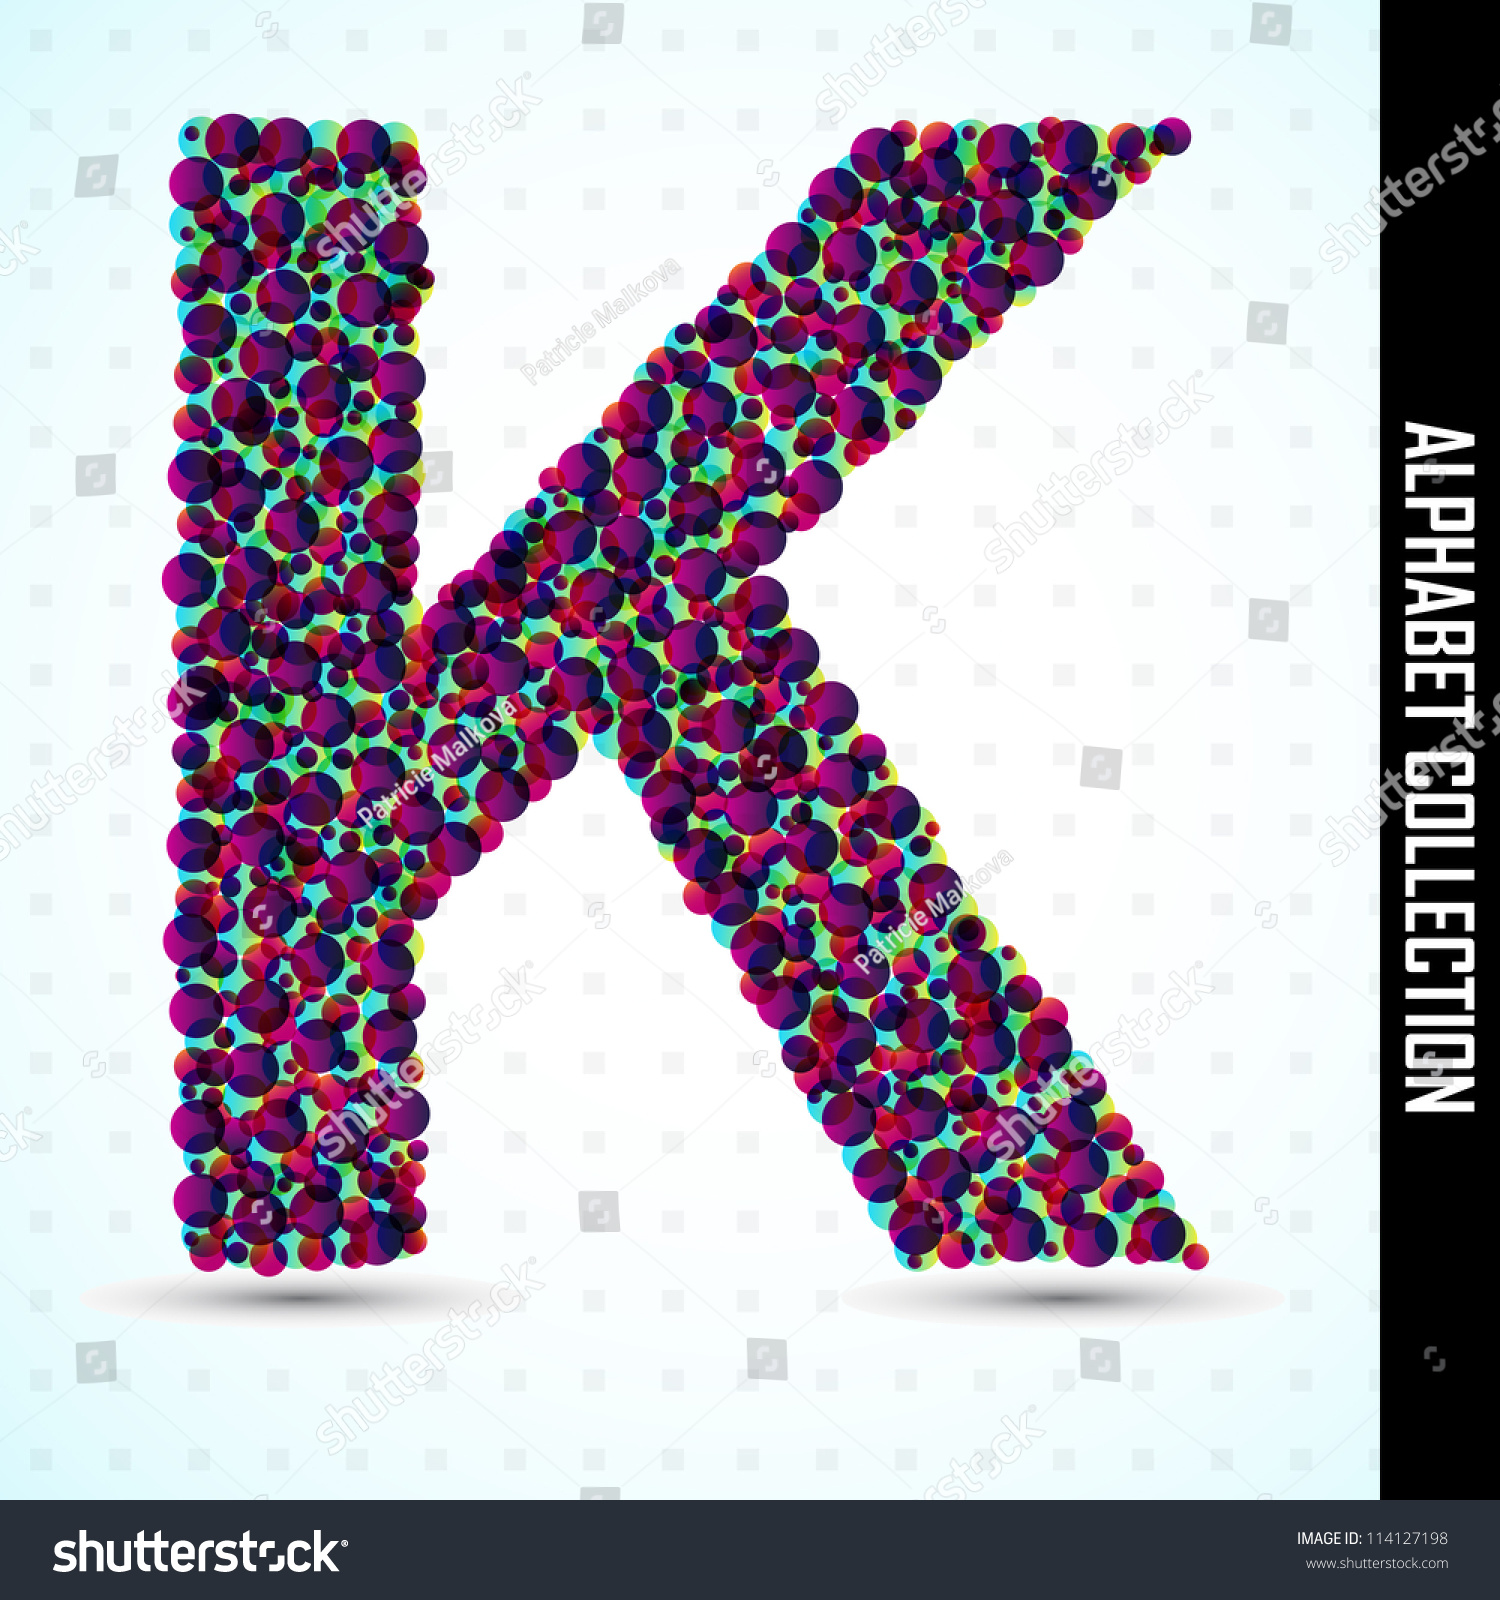 Colored Vector Letter K From The Alphabet Set - Eps 10 - 114127198 ...